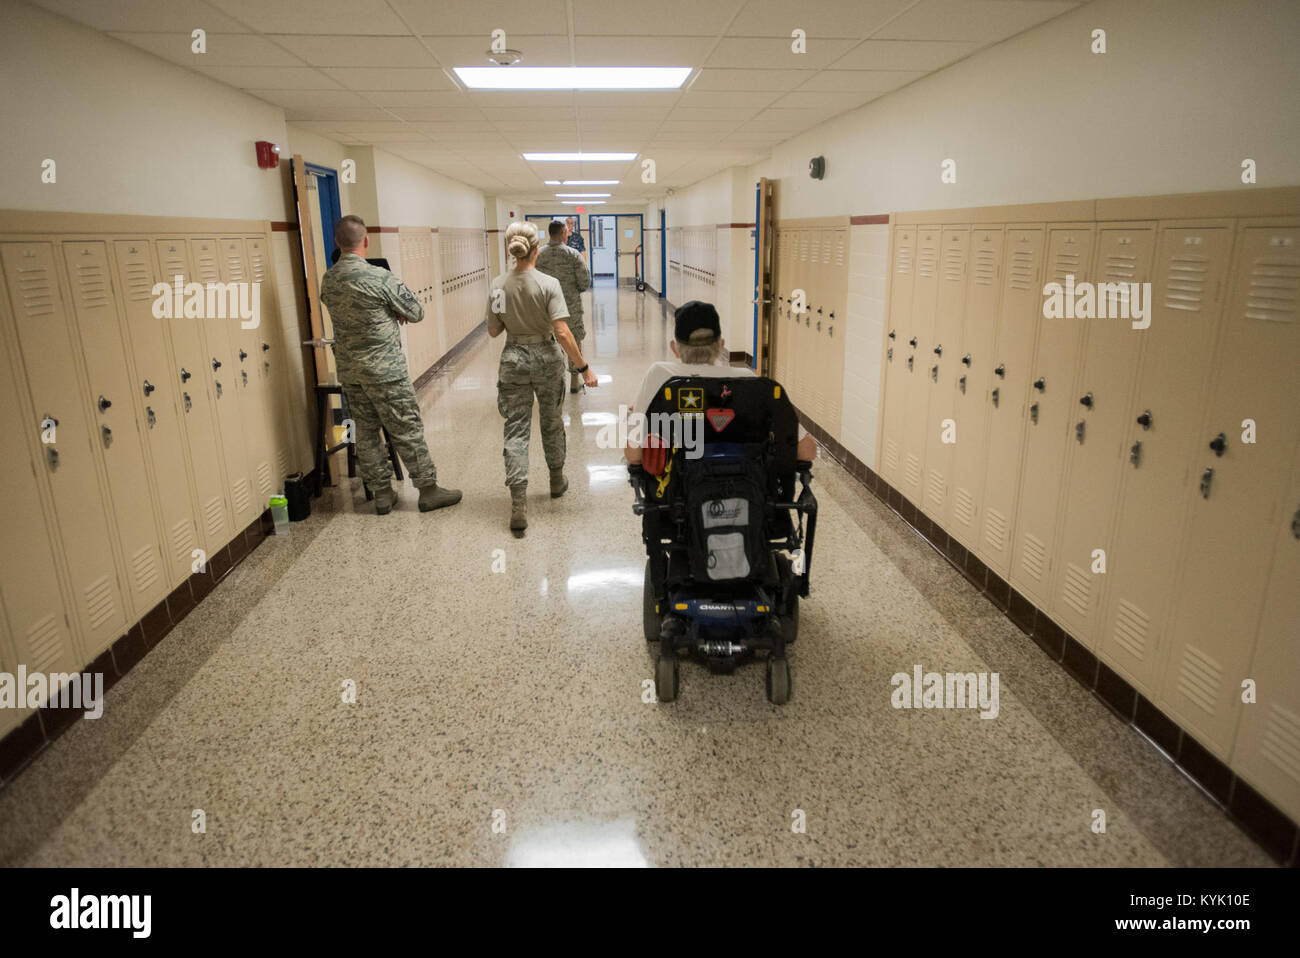 An Army veteran is escorted to an exam room by a U.S. Air Force Airman at Paducah Tilghman High School in Paducah, Ky., July 18, 2016, during the Bluegrass Medical Innovative Readiness Training. During this training several Air National Guard units including the Kentucky Air National Guard, U.S. Navy Reserves, U.S. Army National Guard and Delta Regional Authority will offer medical and dental care at no cost to residents in three Western Kentucky locations from July 18 to 27. (U.S. Air National Guard photo by Master Sgt. Phil Speck) Stock Photo